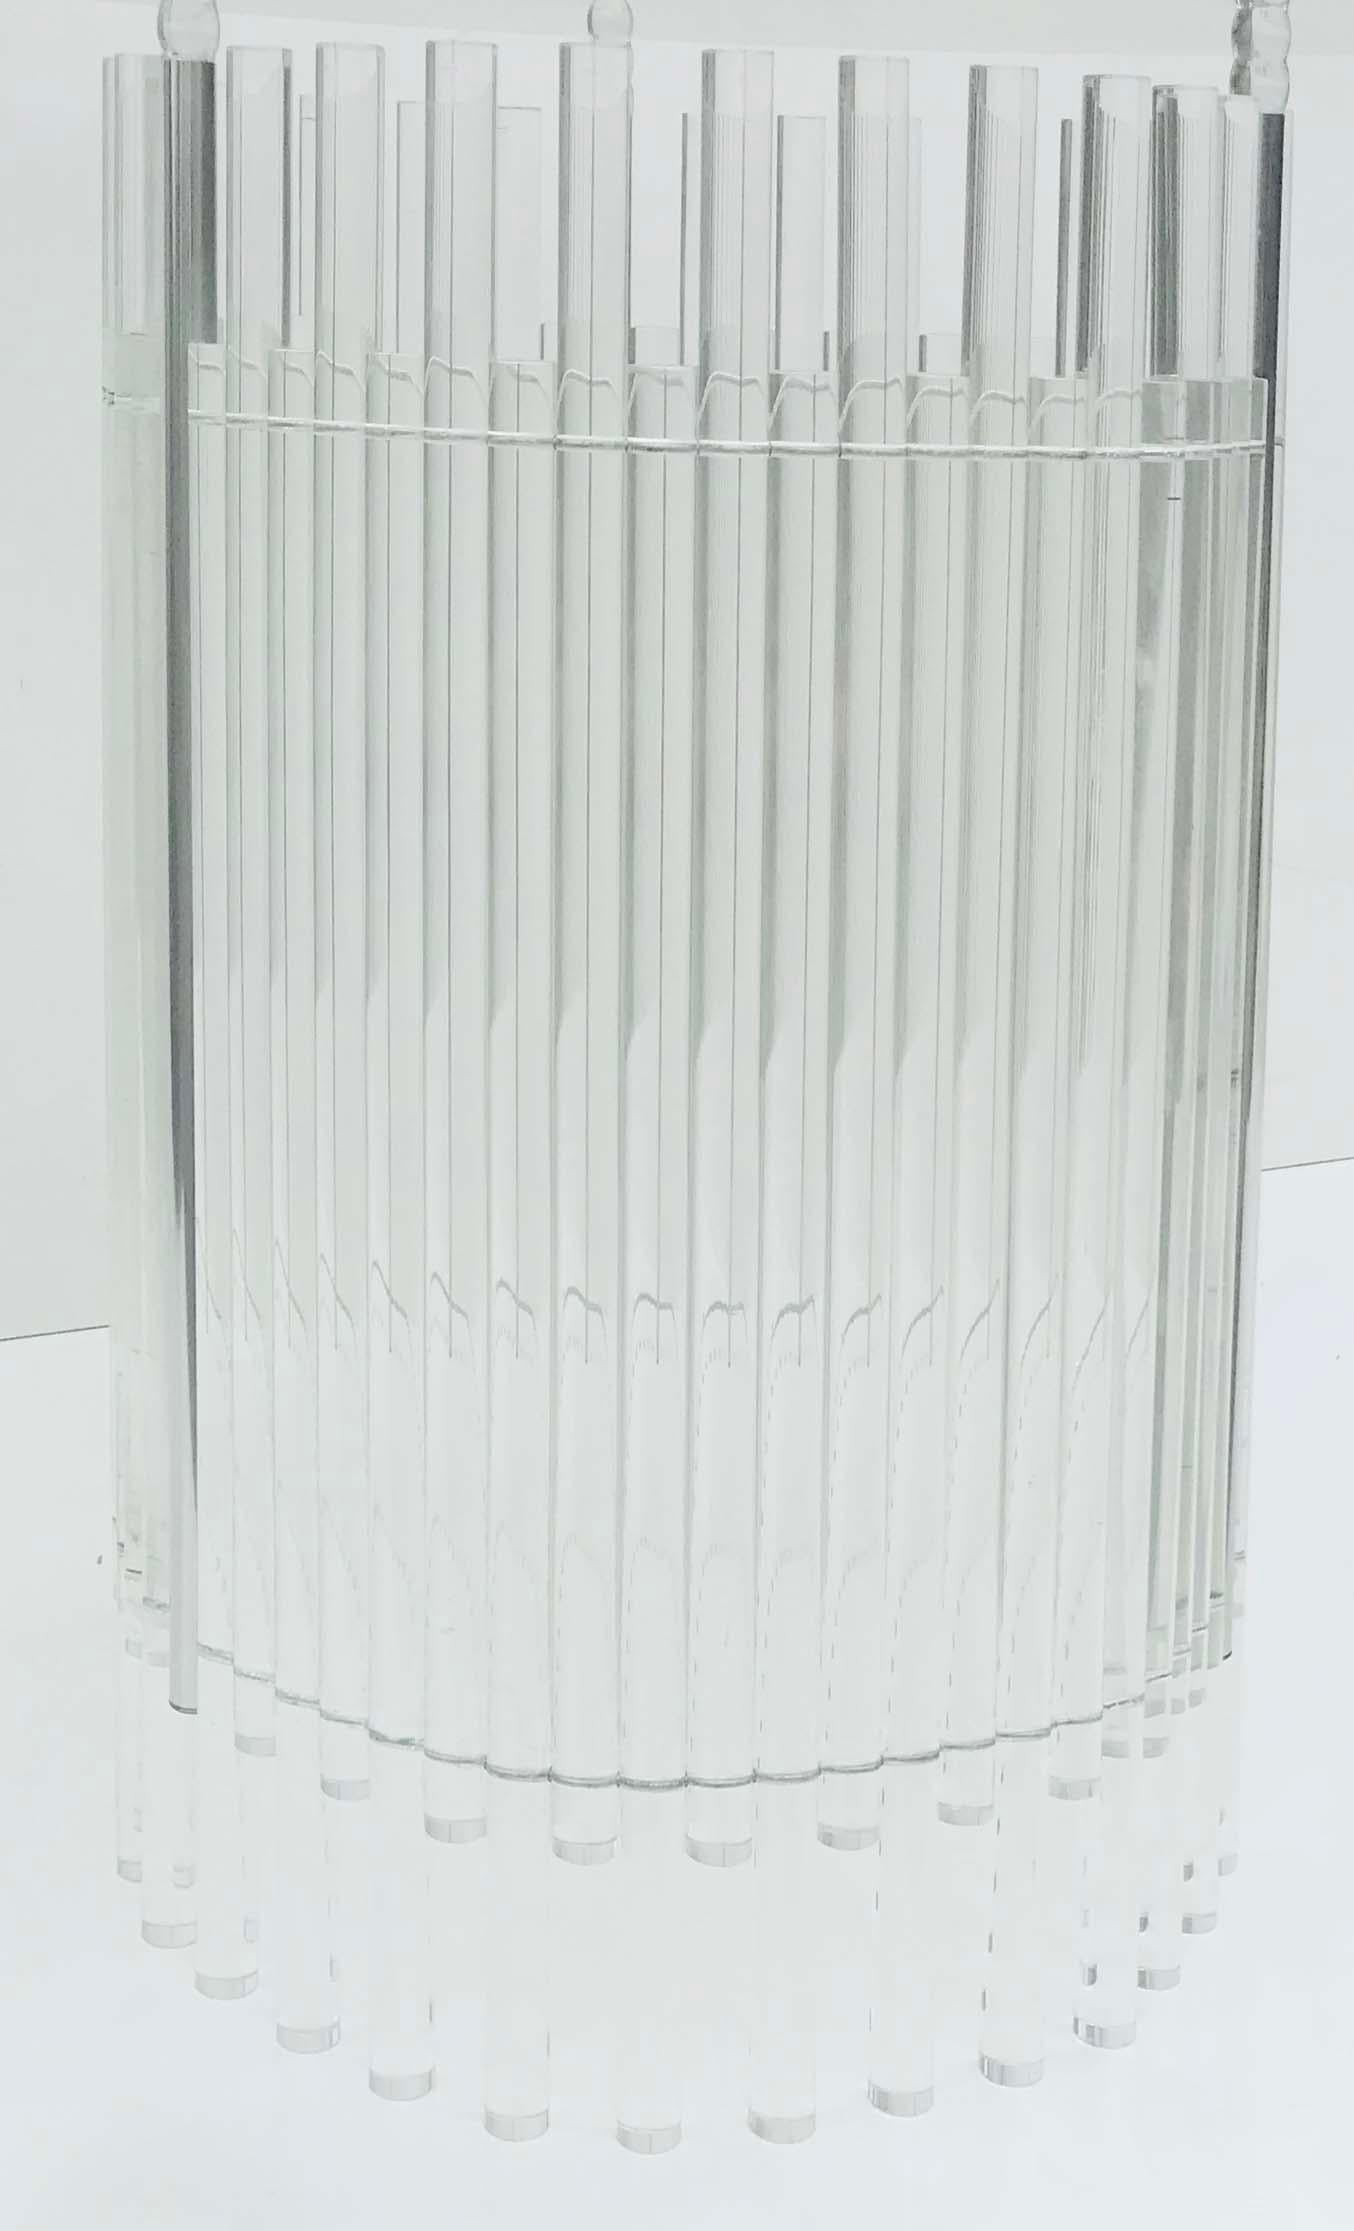 Superb Lucite and glass dining room table , drum base made of Lucite rods, thick glass top 
sturdy and elegant.

Diameter foot: 20 